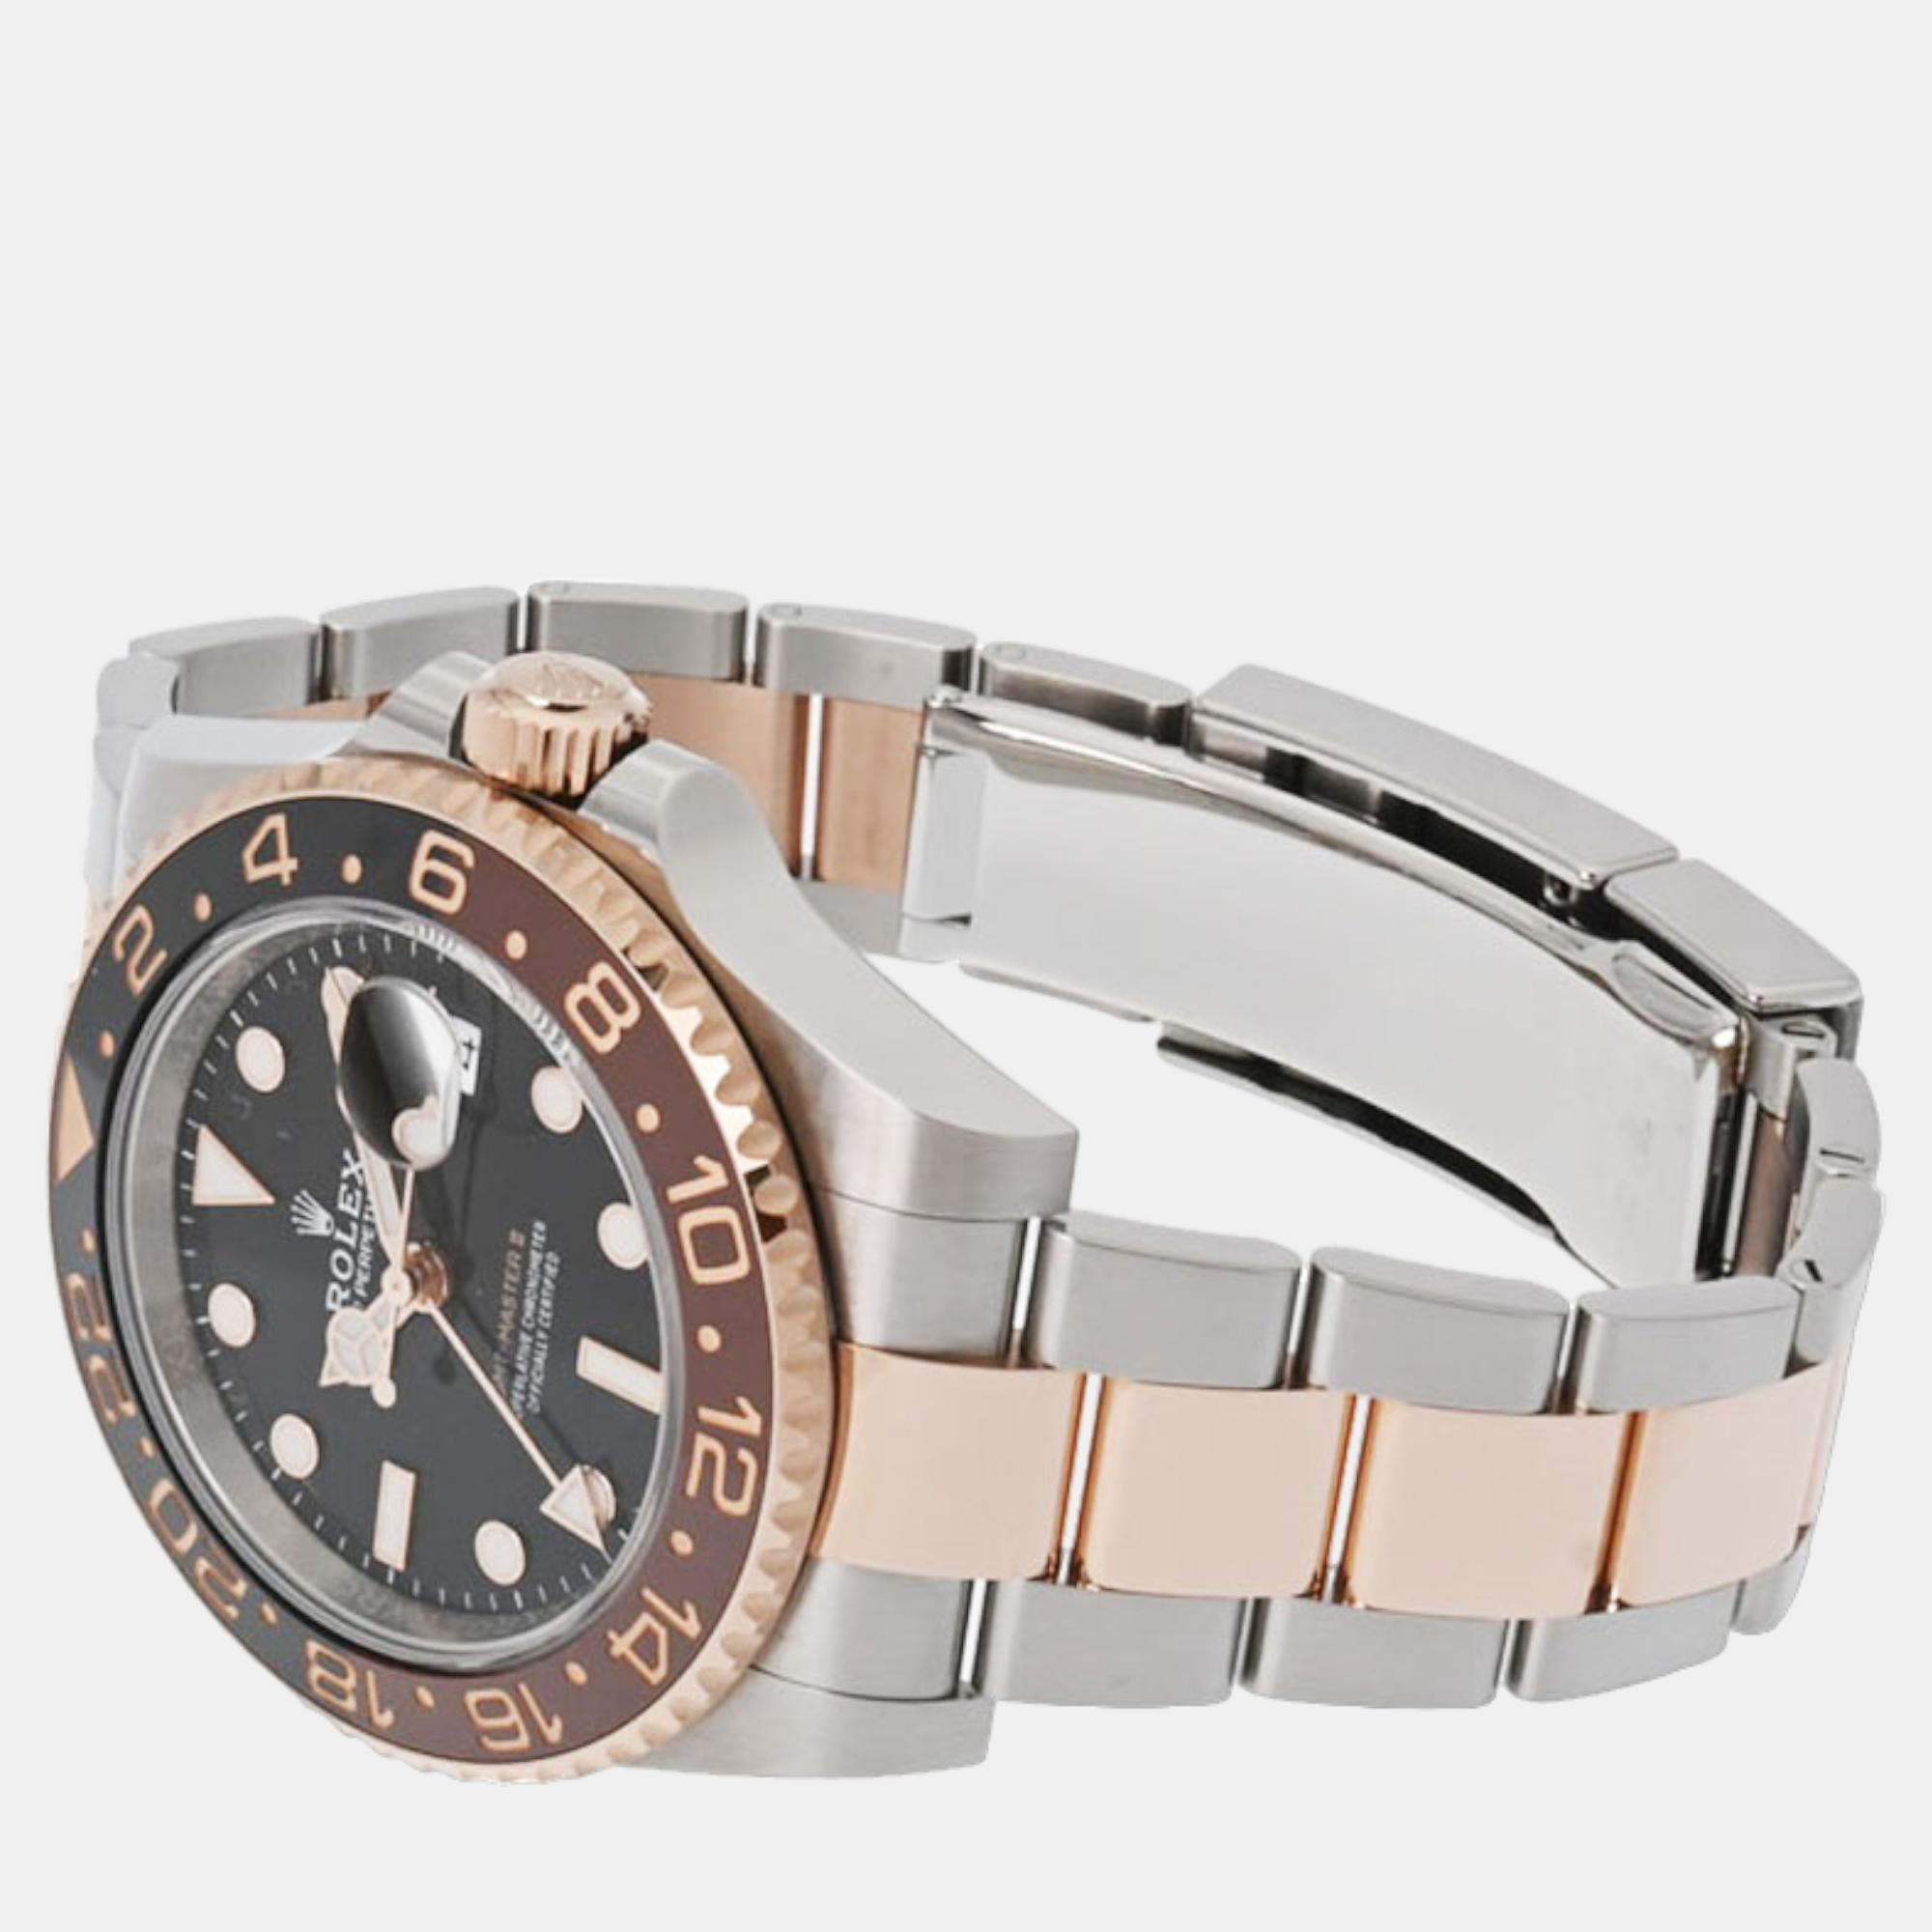 Rolex Black 18k Rose Gold And Stainless Steel GMT-Master II 126711CHNR Automatic Men's Wristwatch 40 Mm